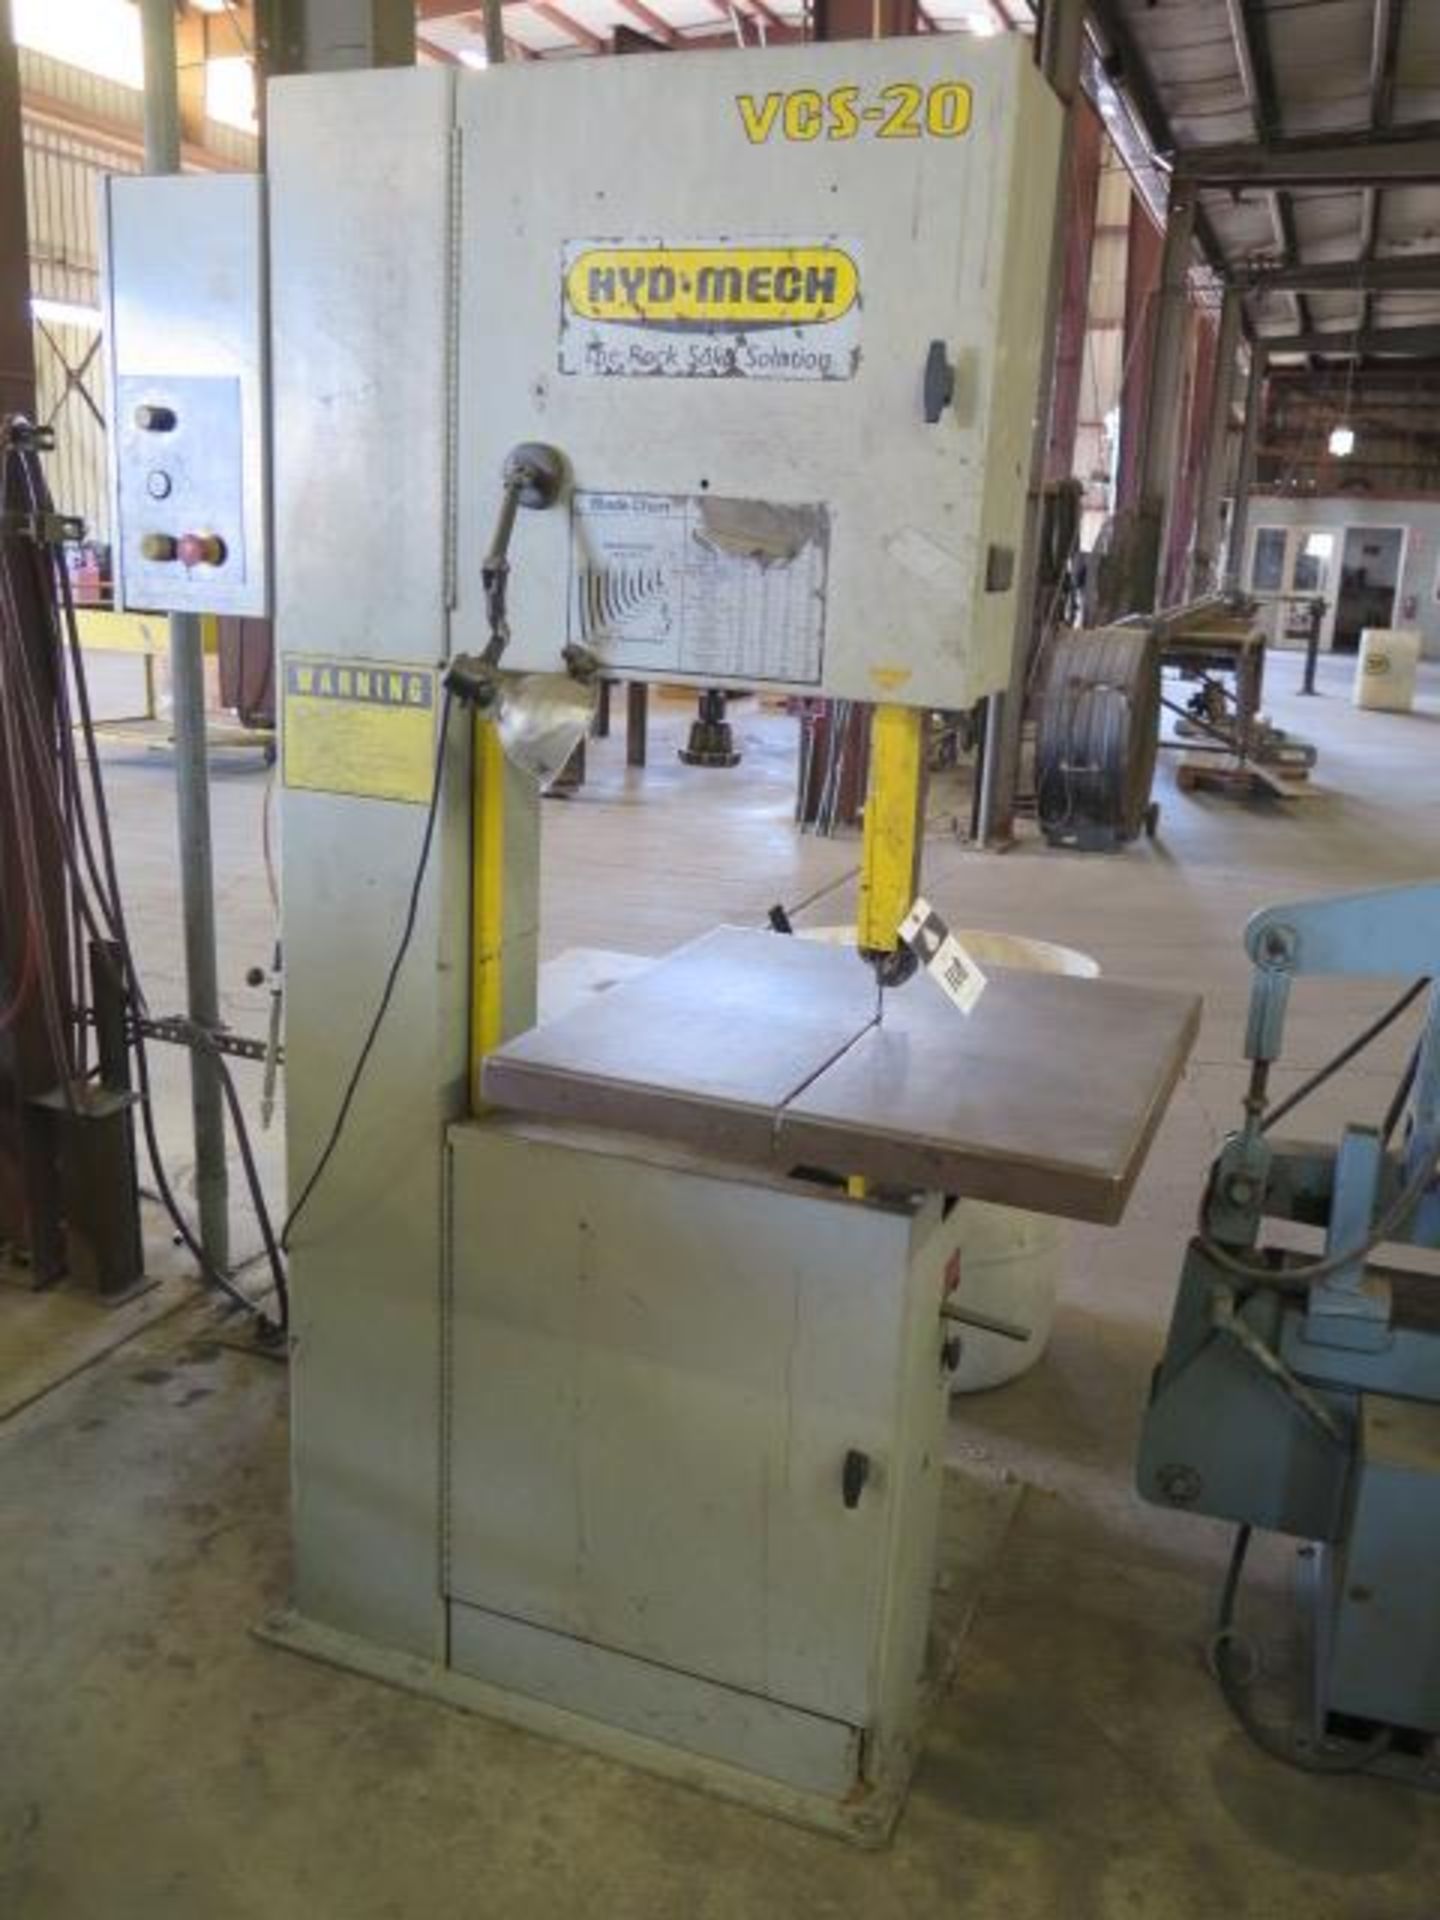 Hyd-Mech VCS-20 20” Vertical Band Saw s/n VCS2003110055 w/ 30-5500 FPM, 26” x 26” Table SOLD AS IS - Image 2 of 6